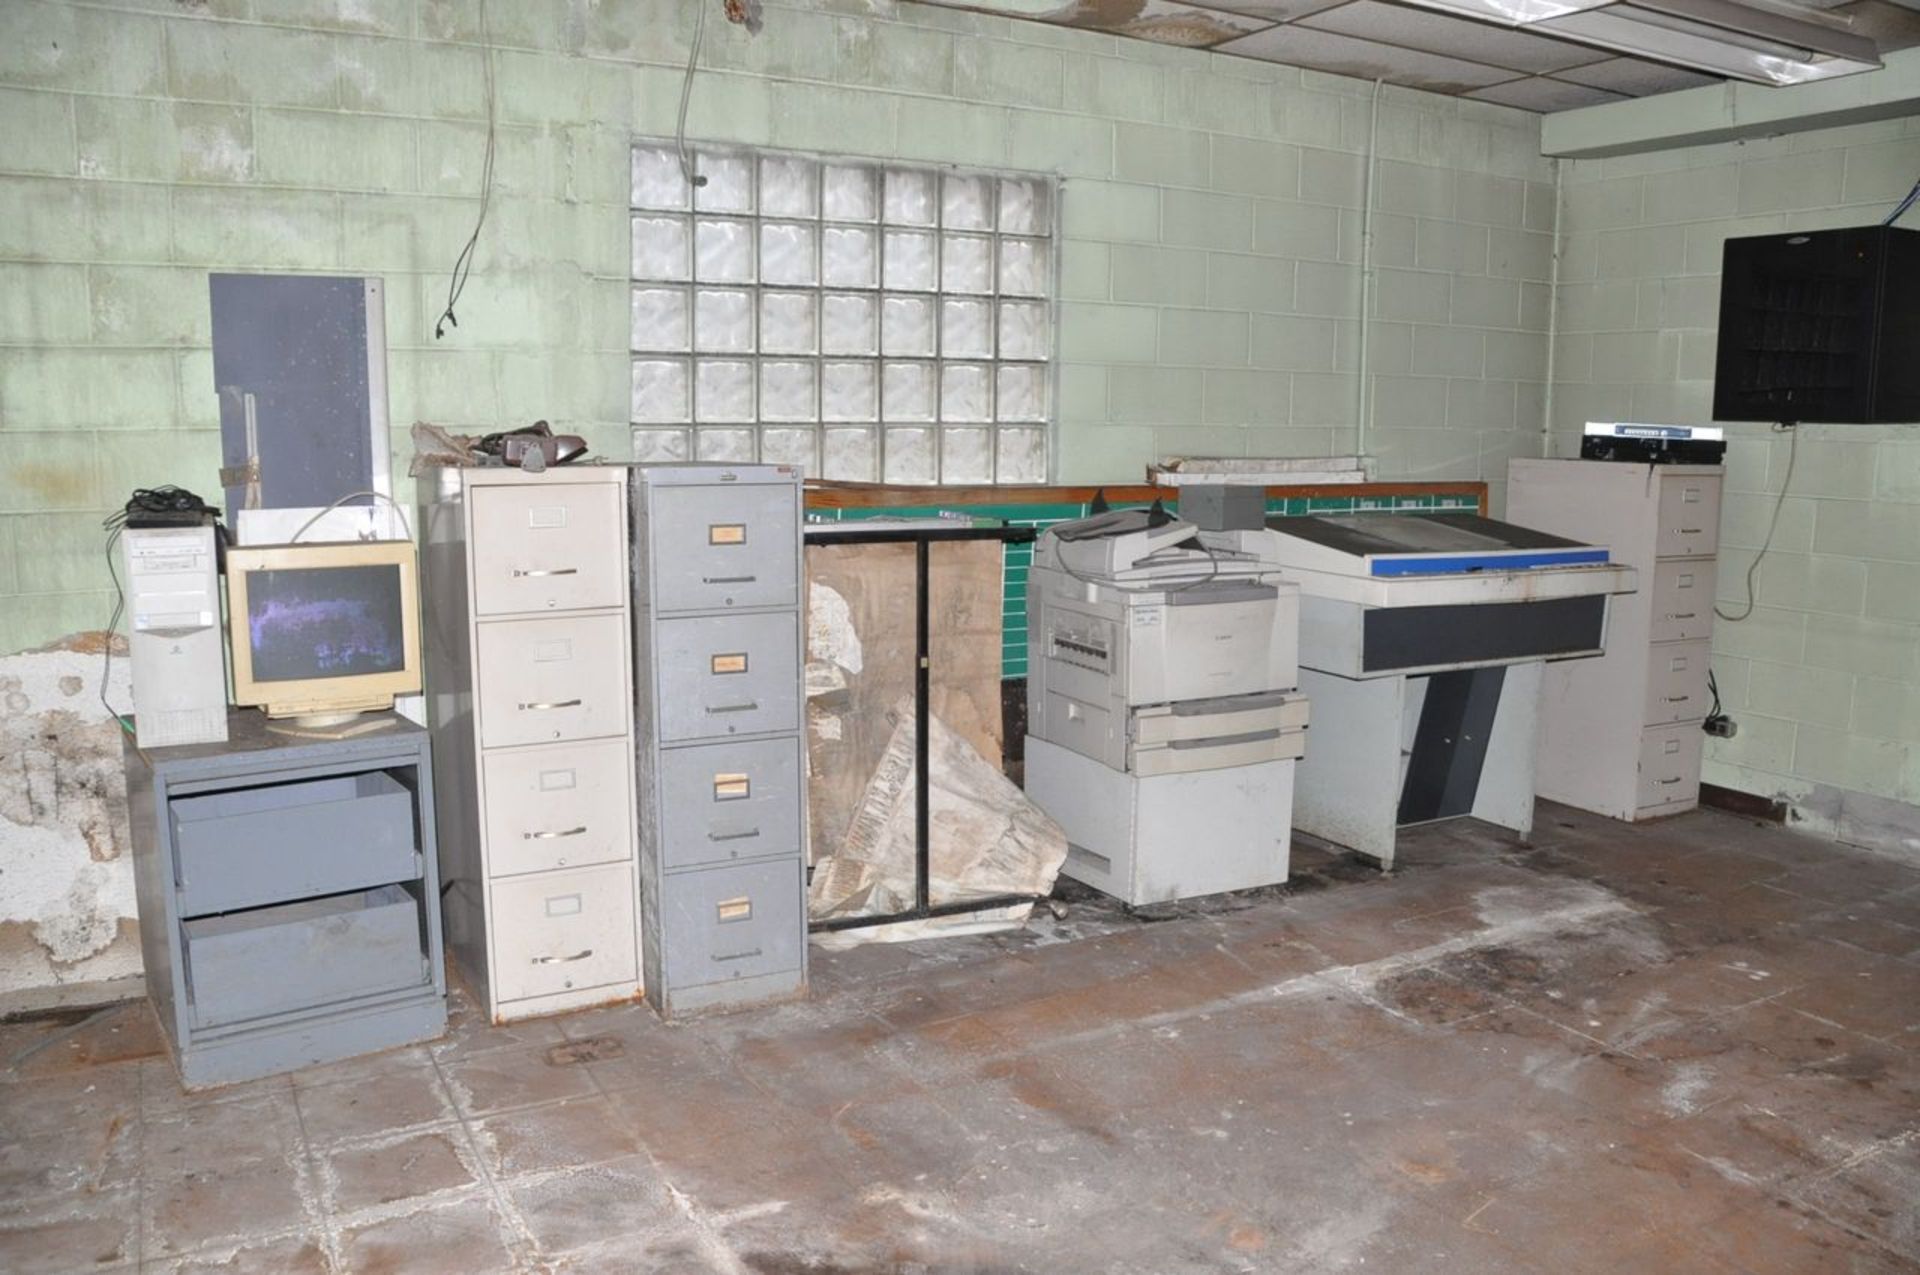 Lot - Drawing Tables, Copy Machine, File Cabinets, Desks, Chairs, Refrigerator and Microwave in (